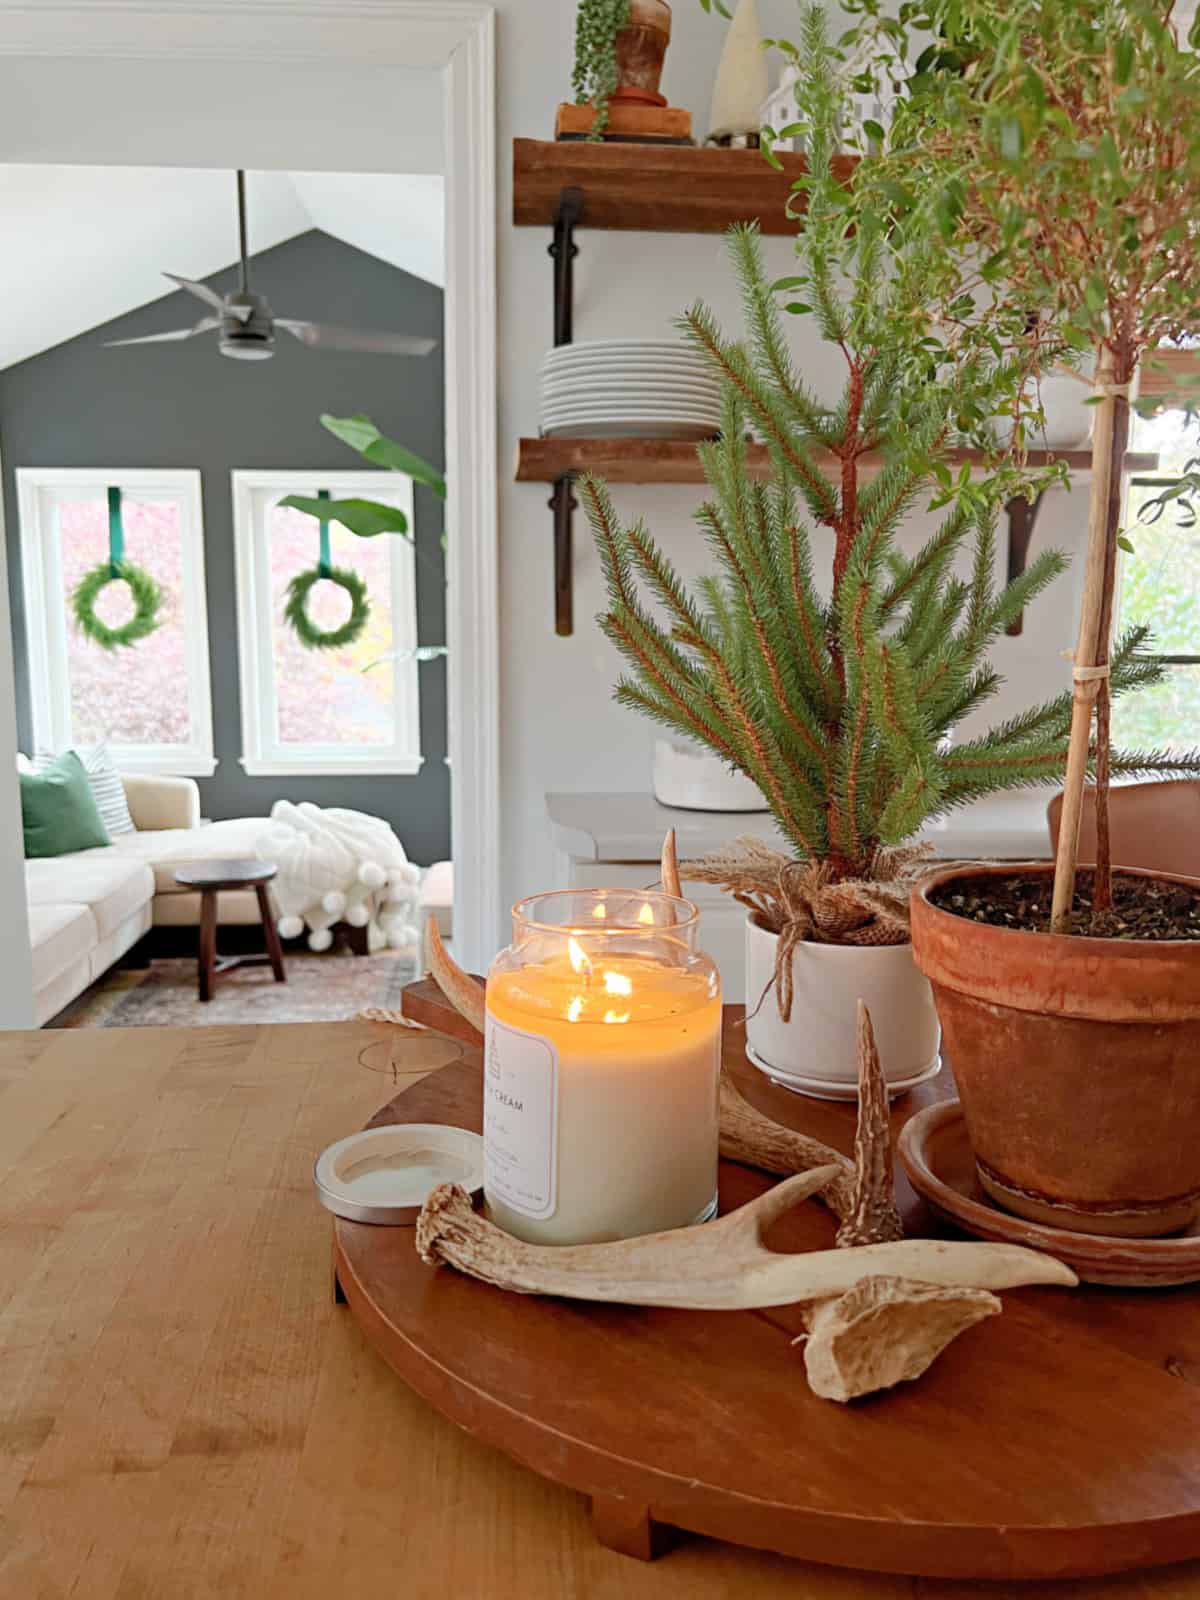 candle plant and small tree on board on kitchen island